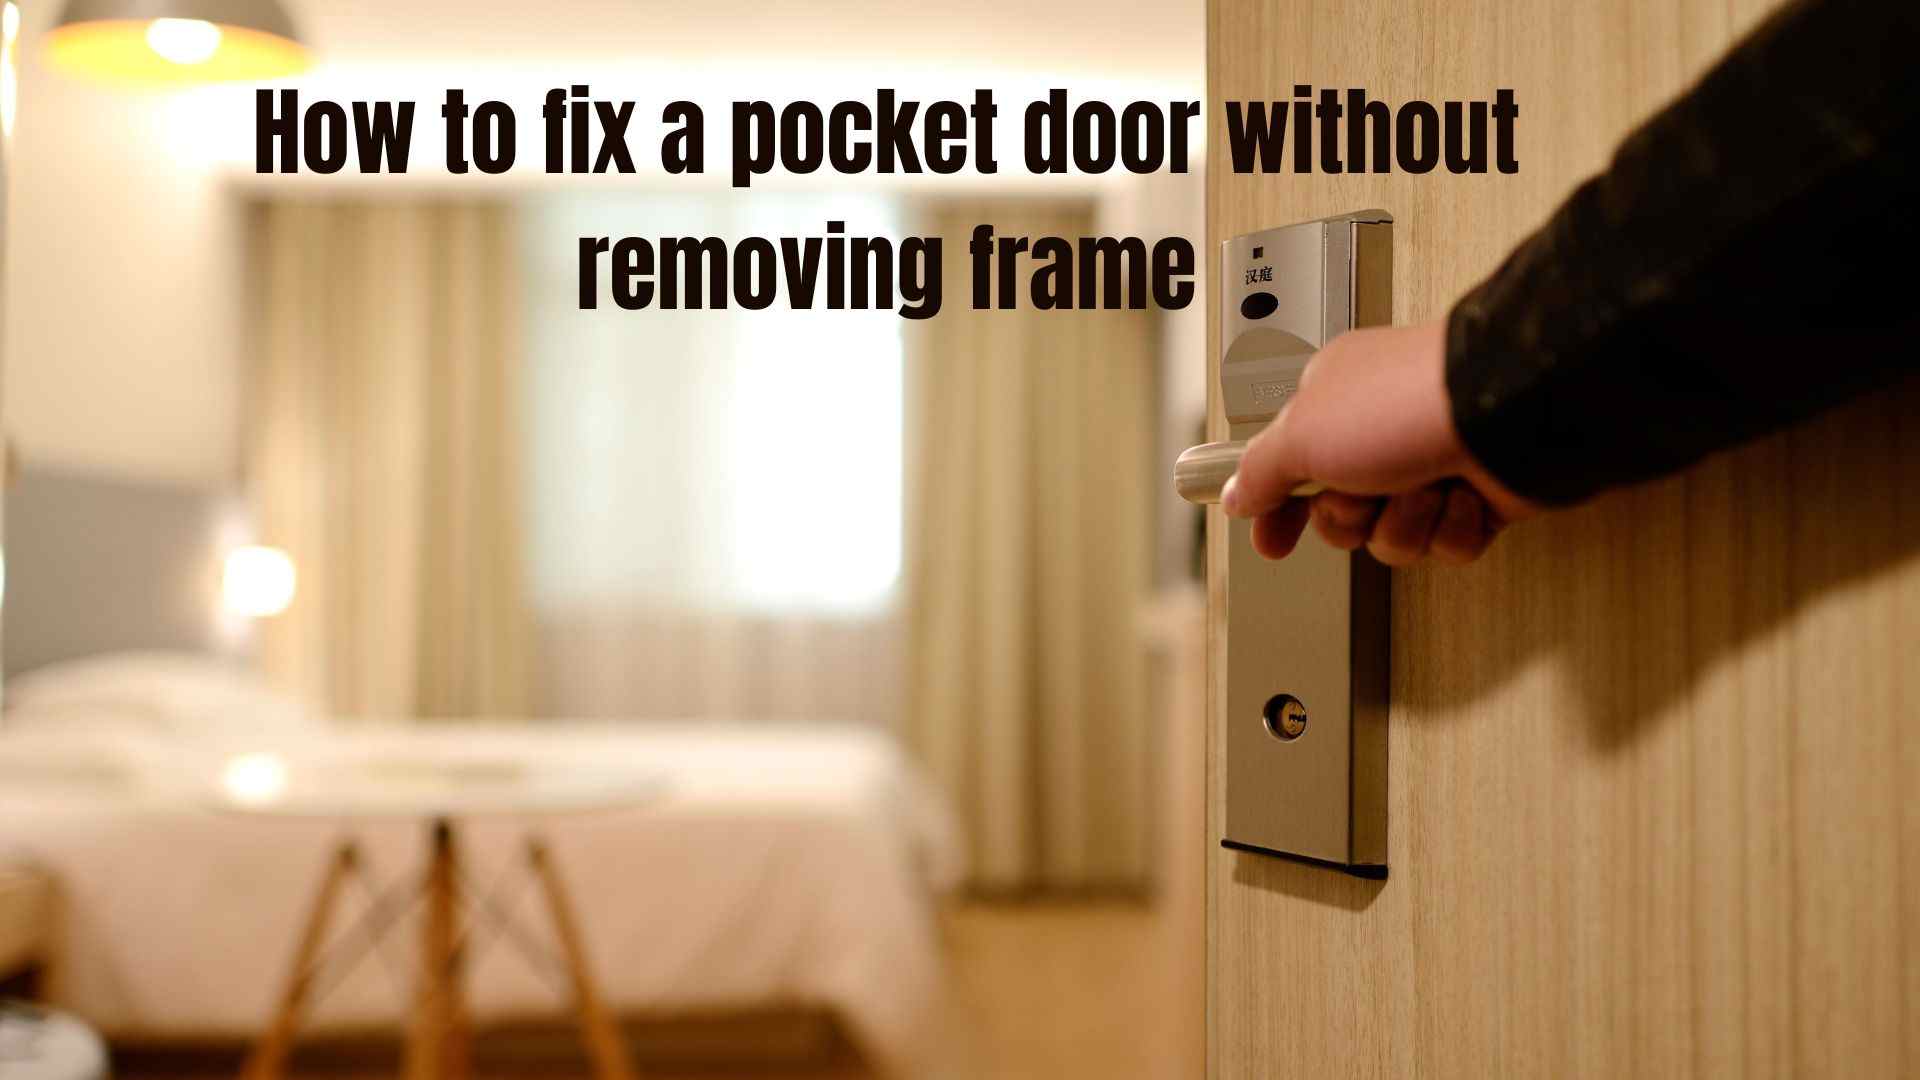 How to fix a pocket door without removing frame